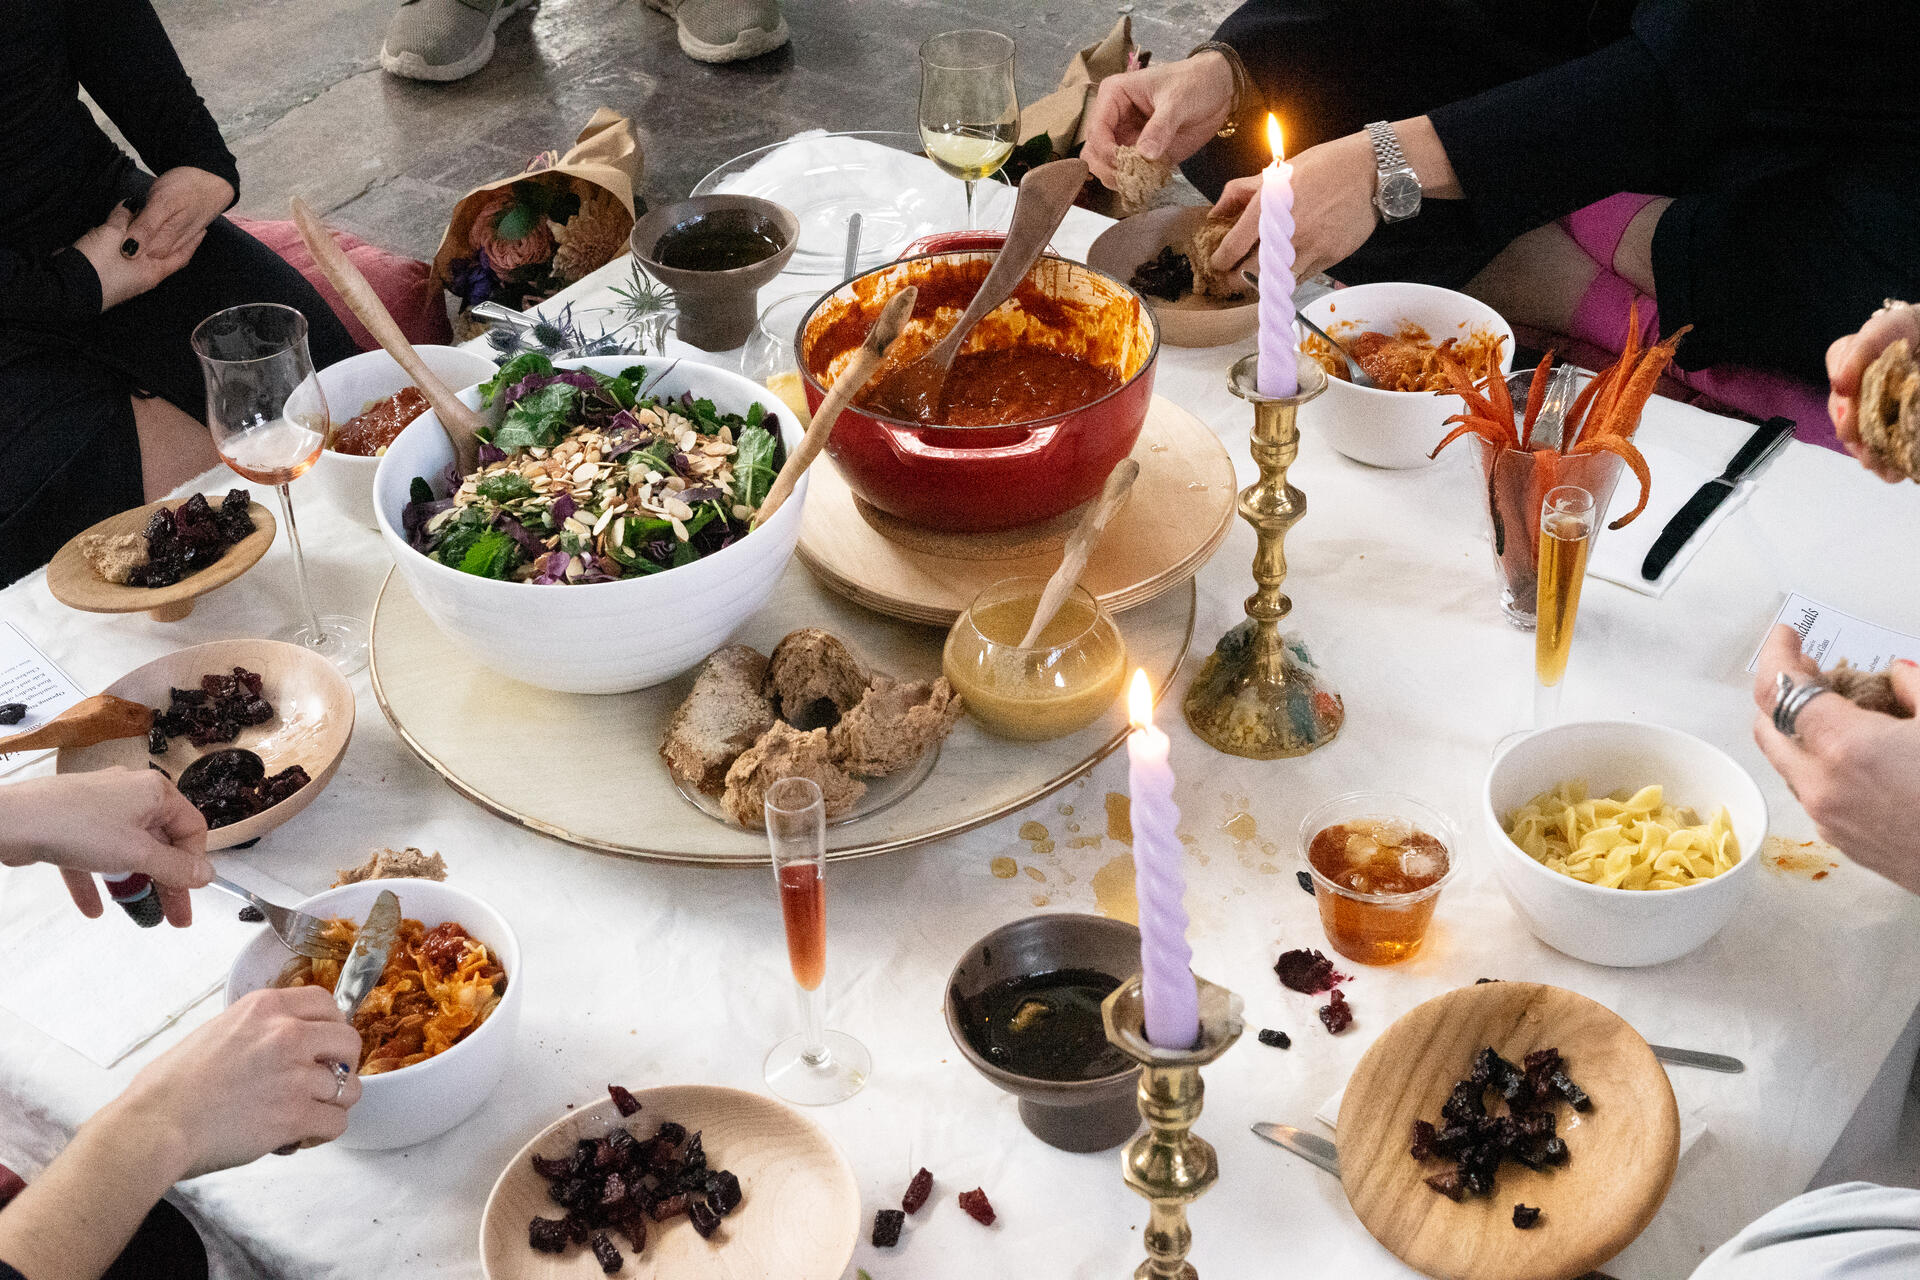 A close up detail photo of a low table with four people sitting around having a very colorful meal of salad, beets, chicken paprikash, purple candles, and with a wooden turntable in the middle. 